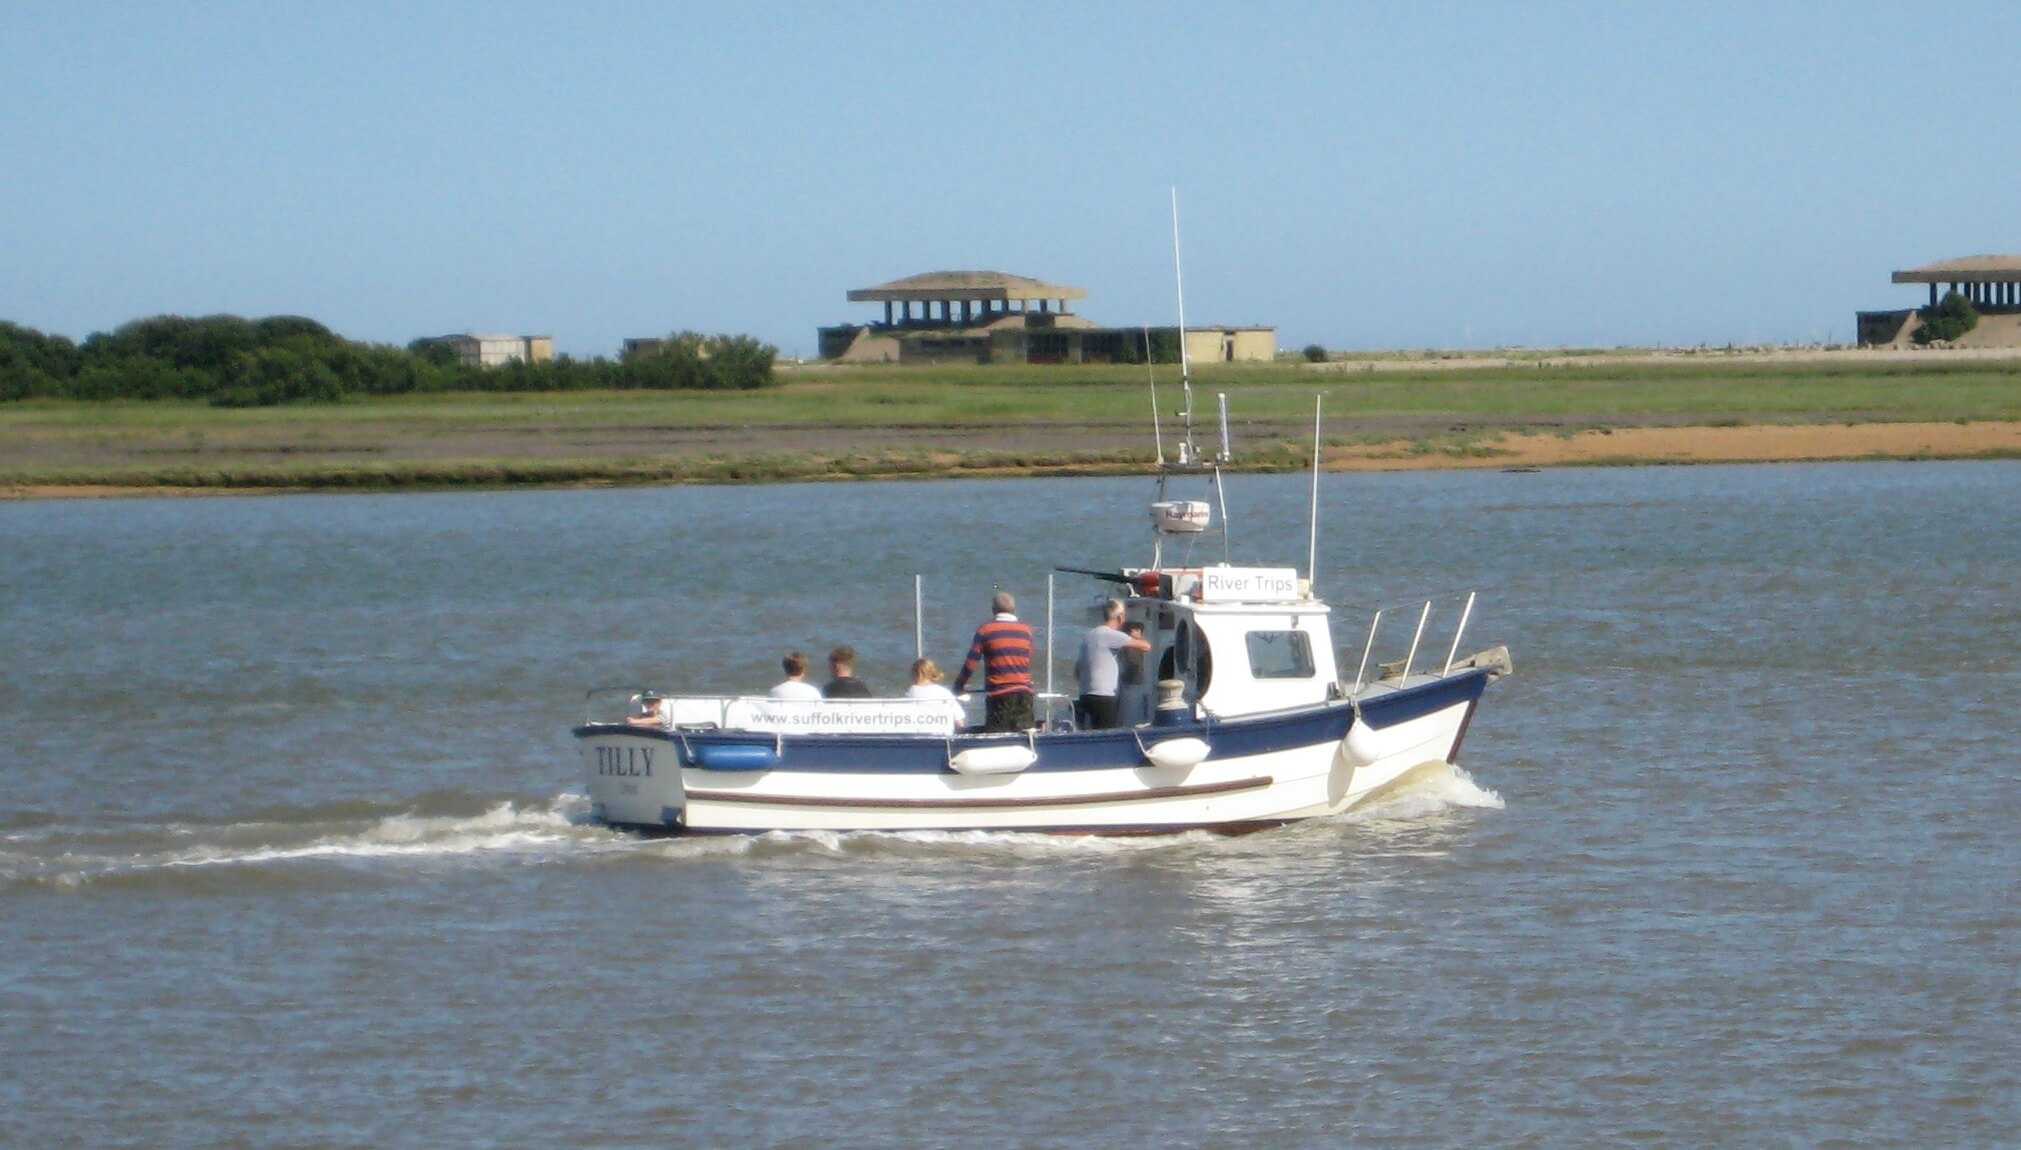 The Tilly on the water in the River Alde